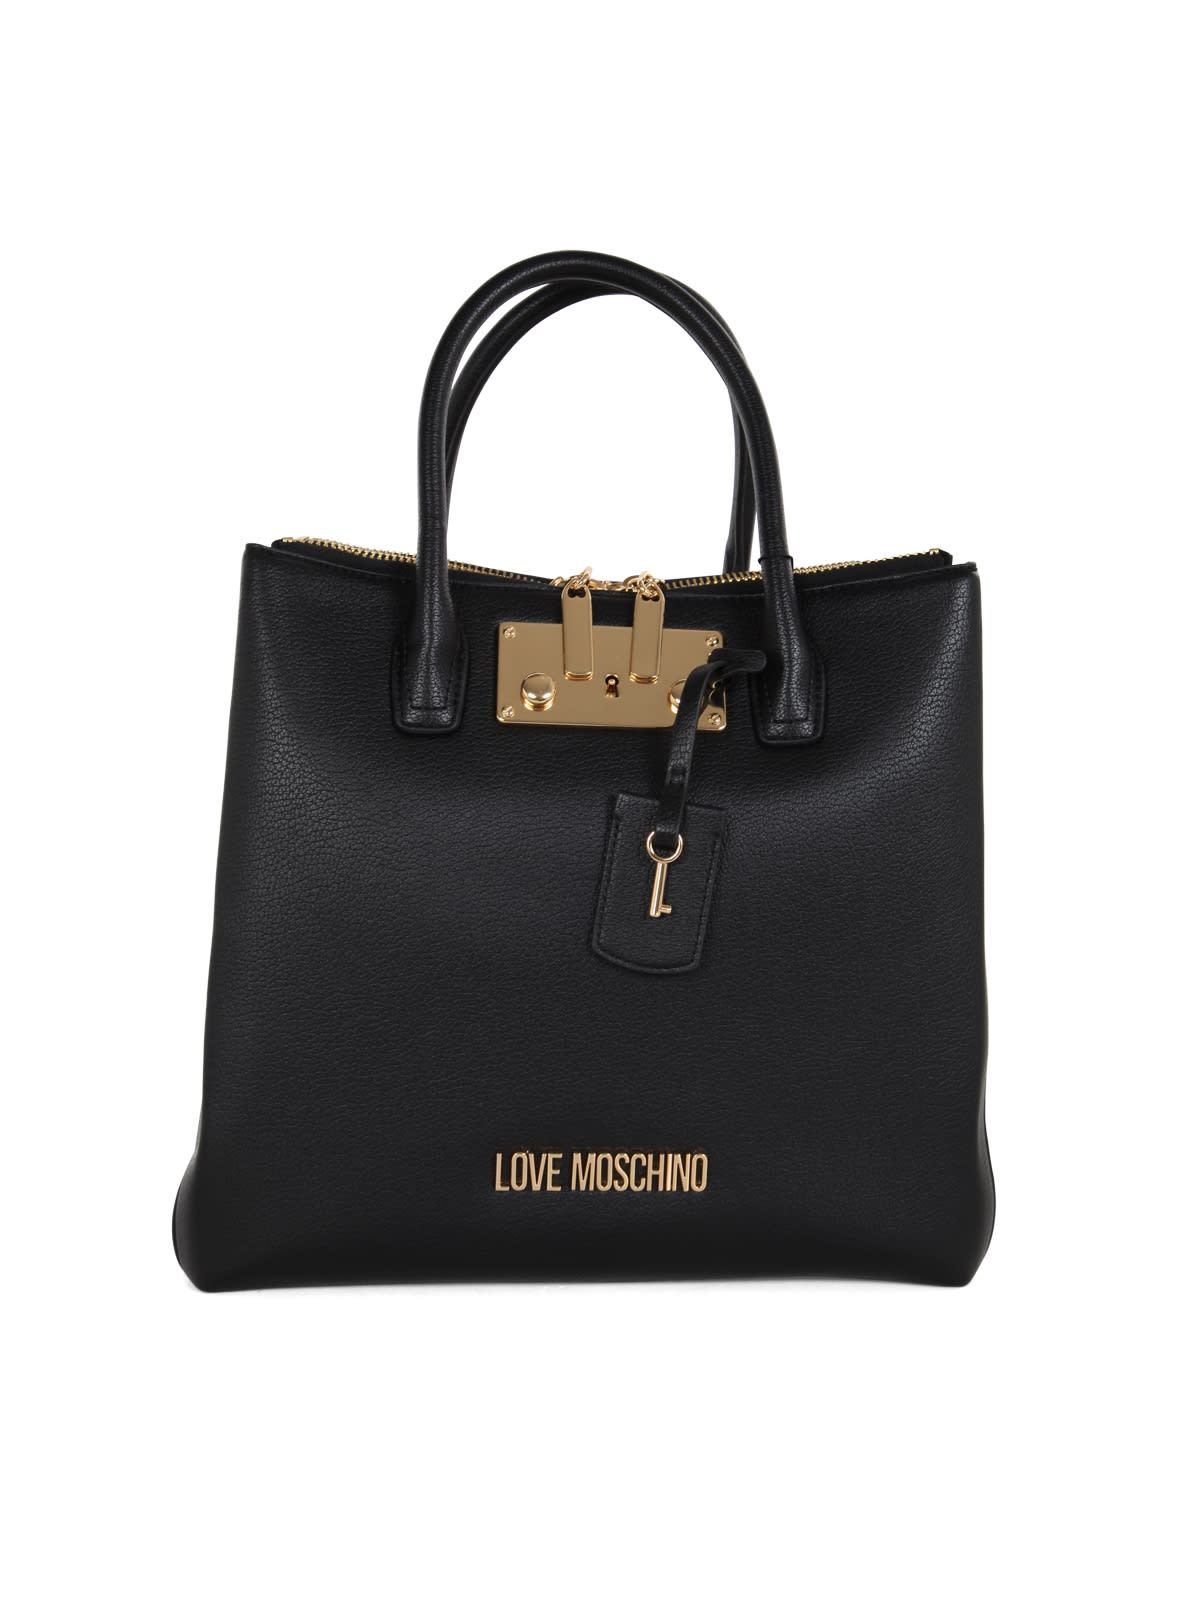 LOVE MOSCHINO TOTE WITH TOP HANDLE